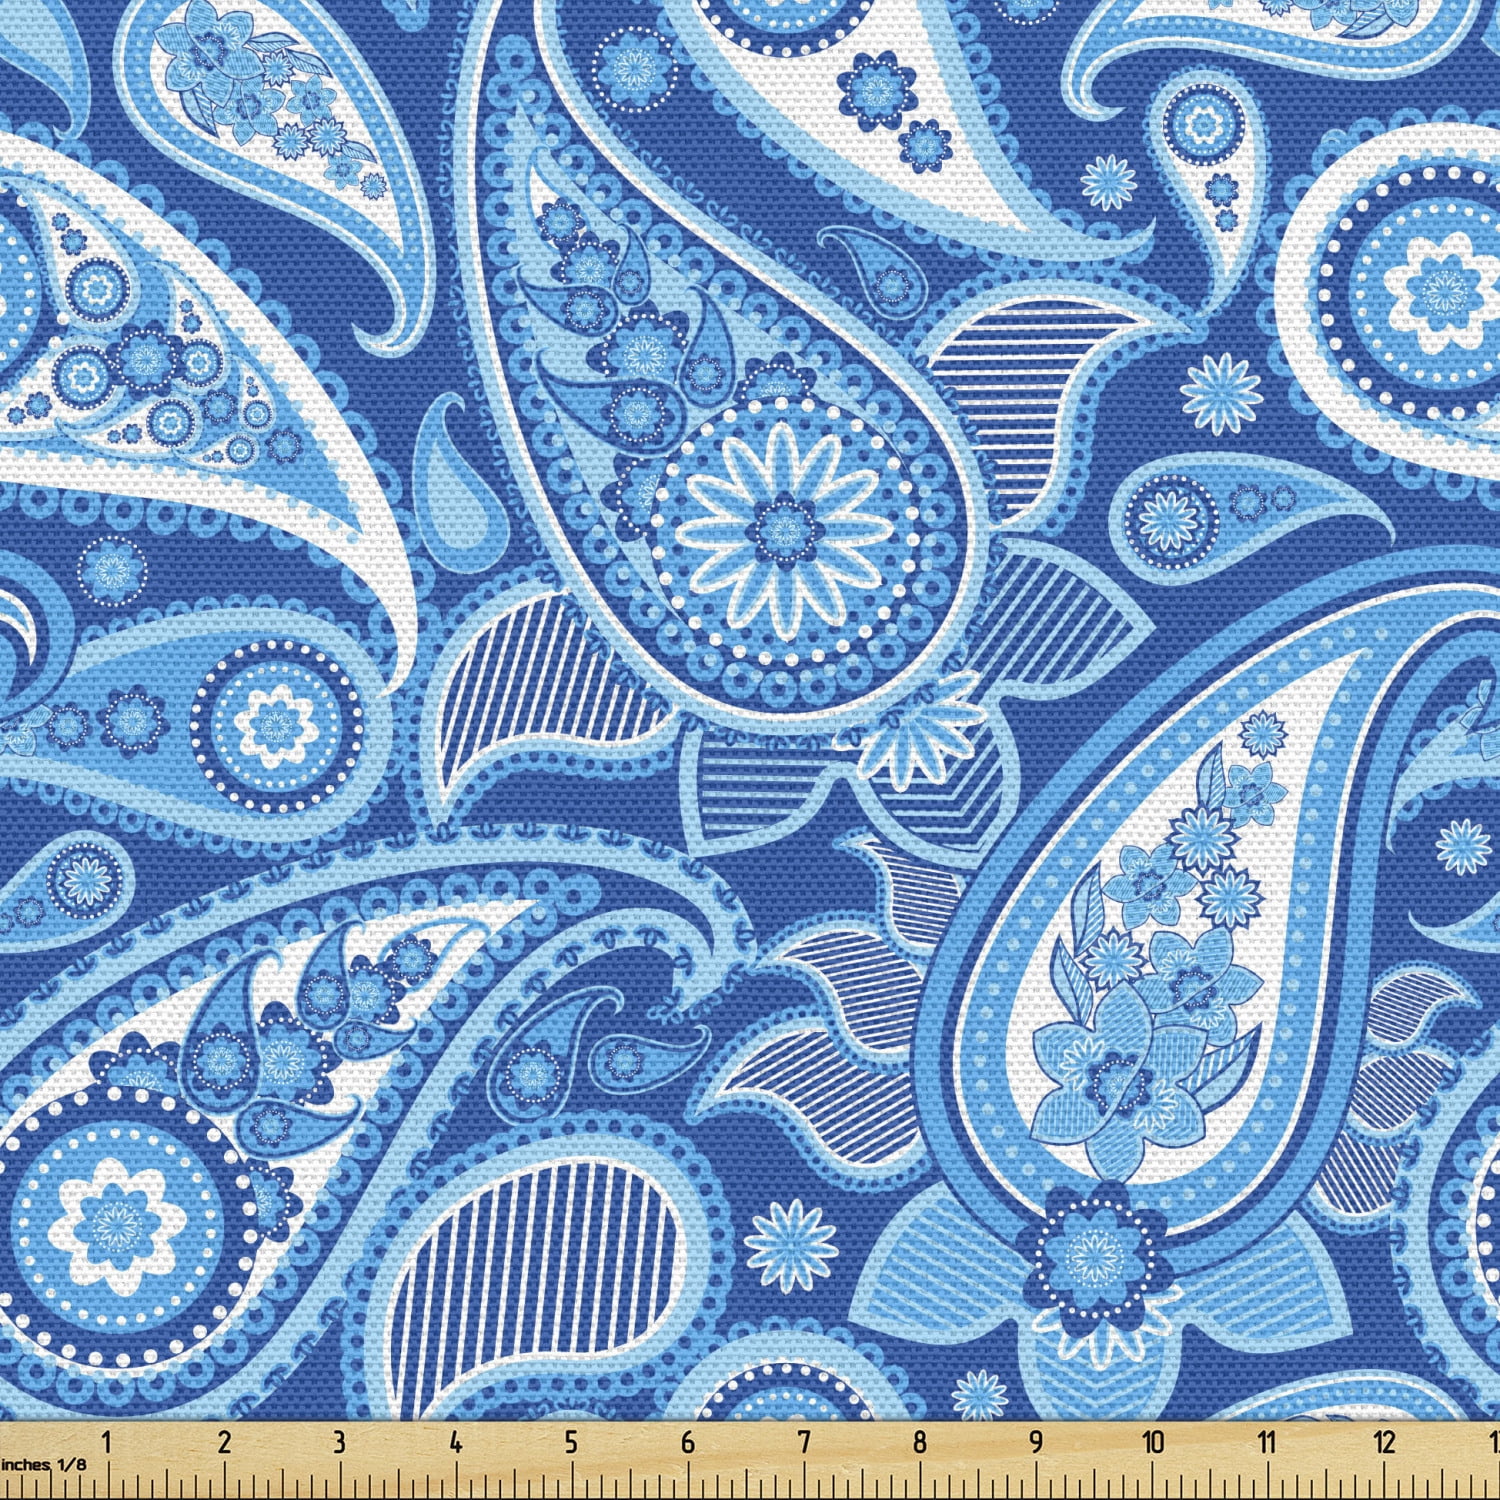 Blue Paisley Fabric by the Yard, Stripes Ovals Ethnic Ornaments Buta ...